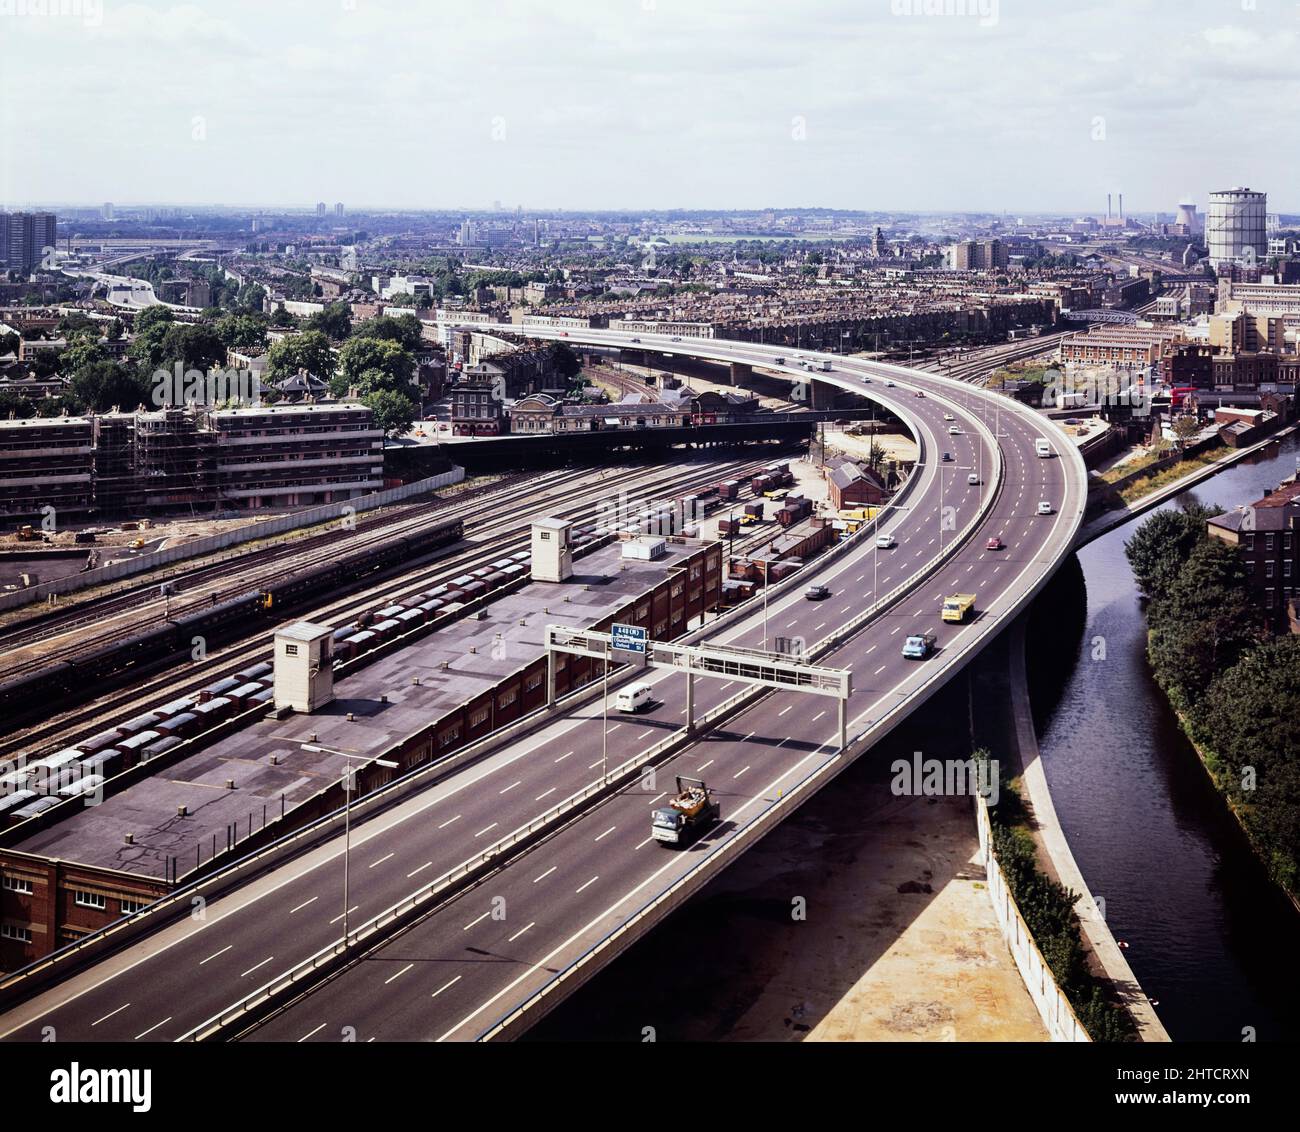 Westway Flyover, A40, Paddington, City of Westminster, London, 01/09/1971. An elevated view looking west along the route of the Westway Flyover, showing it overhanging the Grand Union Canal and curving to cross the railway near Westbourne Park Station. Work on site for the Western Avenue Extension began on 1st September 1966, and the Westway as it became known was officially opened on 28th July 1970. The elevated highway connecting the A40 at White City to Marylebone Road in Paddington, at around 2 &#xbd; miles, was the longest in Europe. This photograph was taken at grid reference TQ249118183 Stock Photo